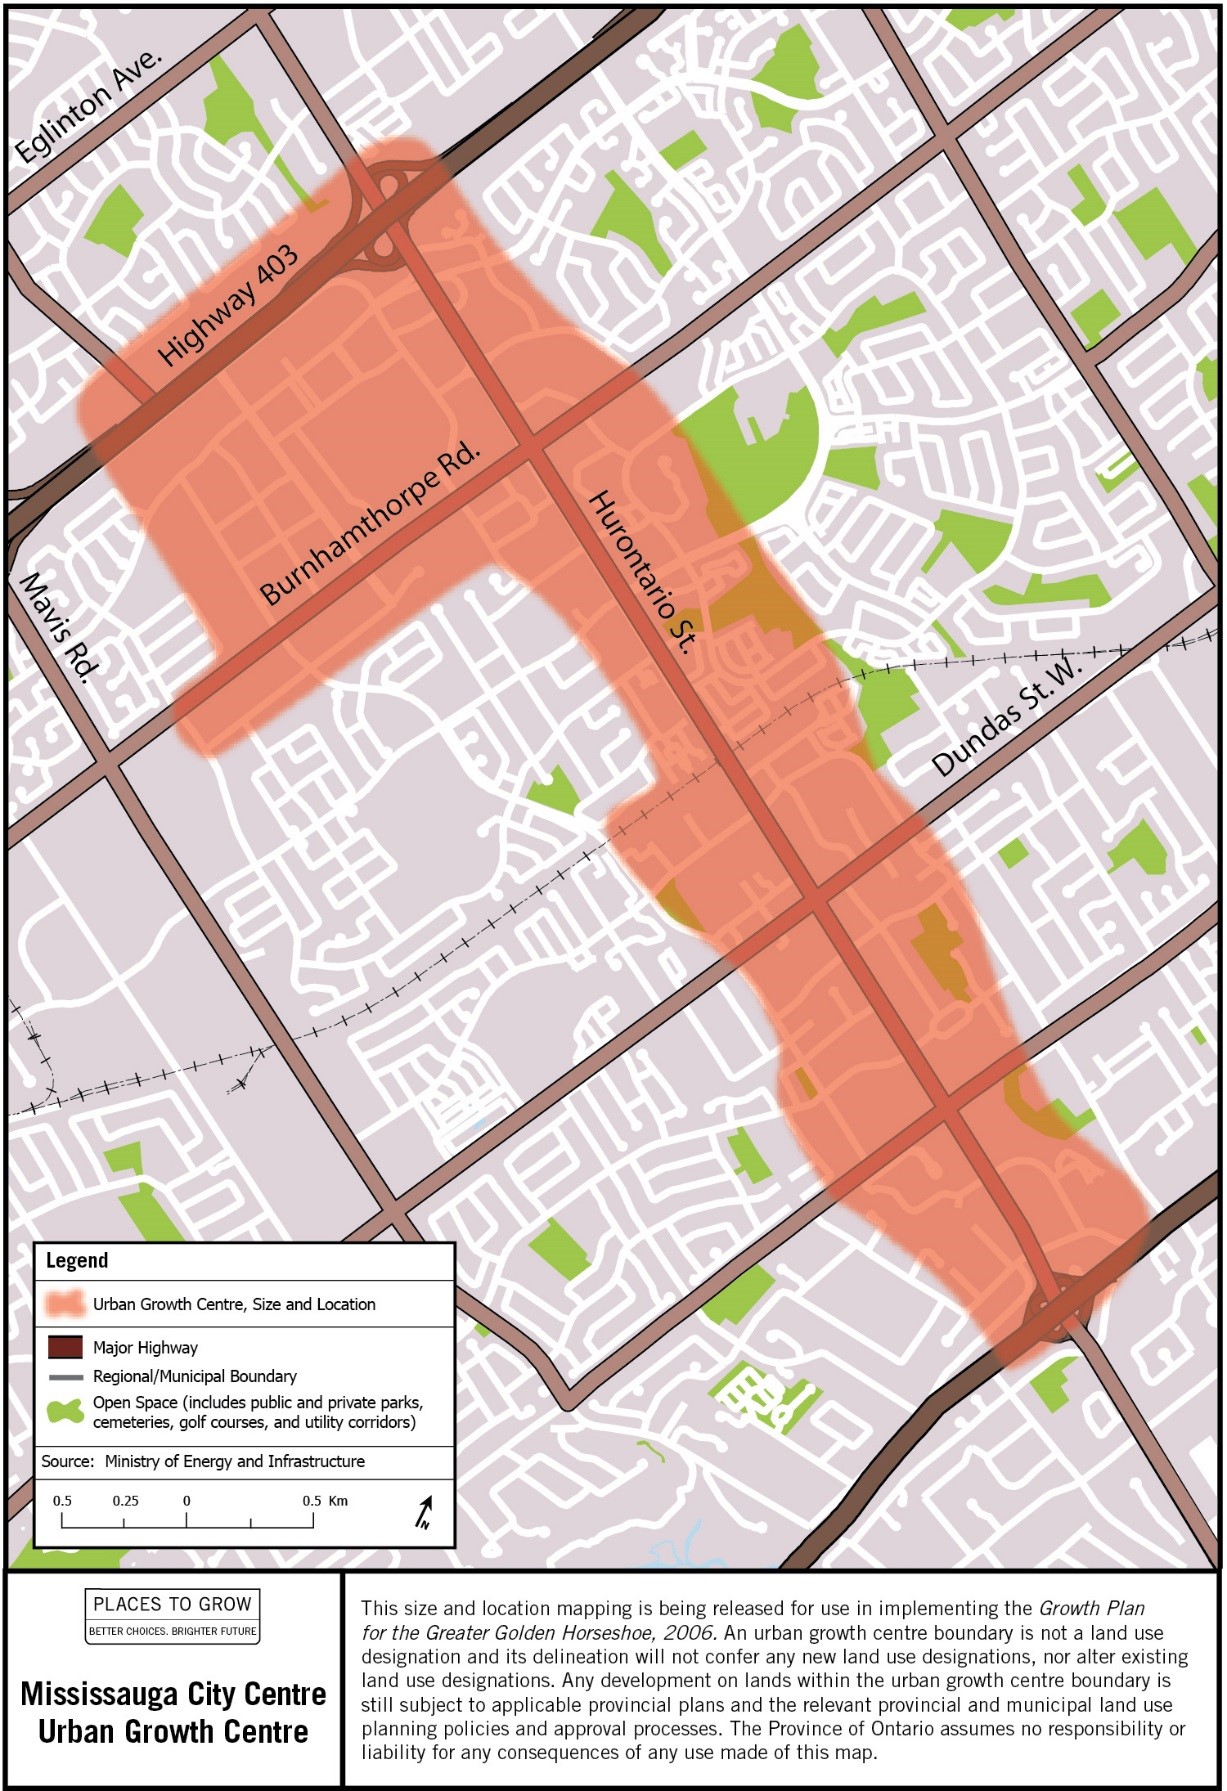 Map of the approximate size and location of the Mississauga City Centre Urban Growth Centre in the vicinity of Burnhamthorpe Road and Hurontario Street.